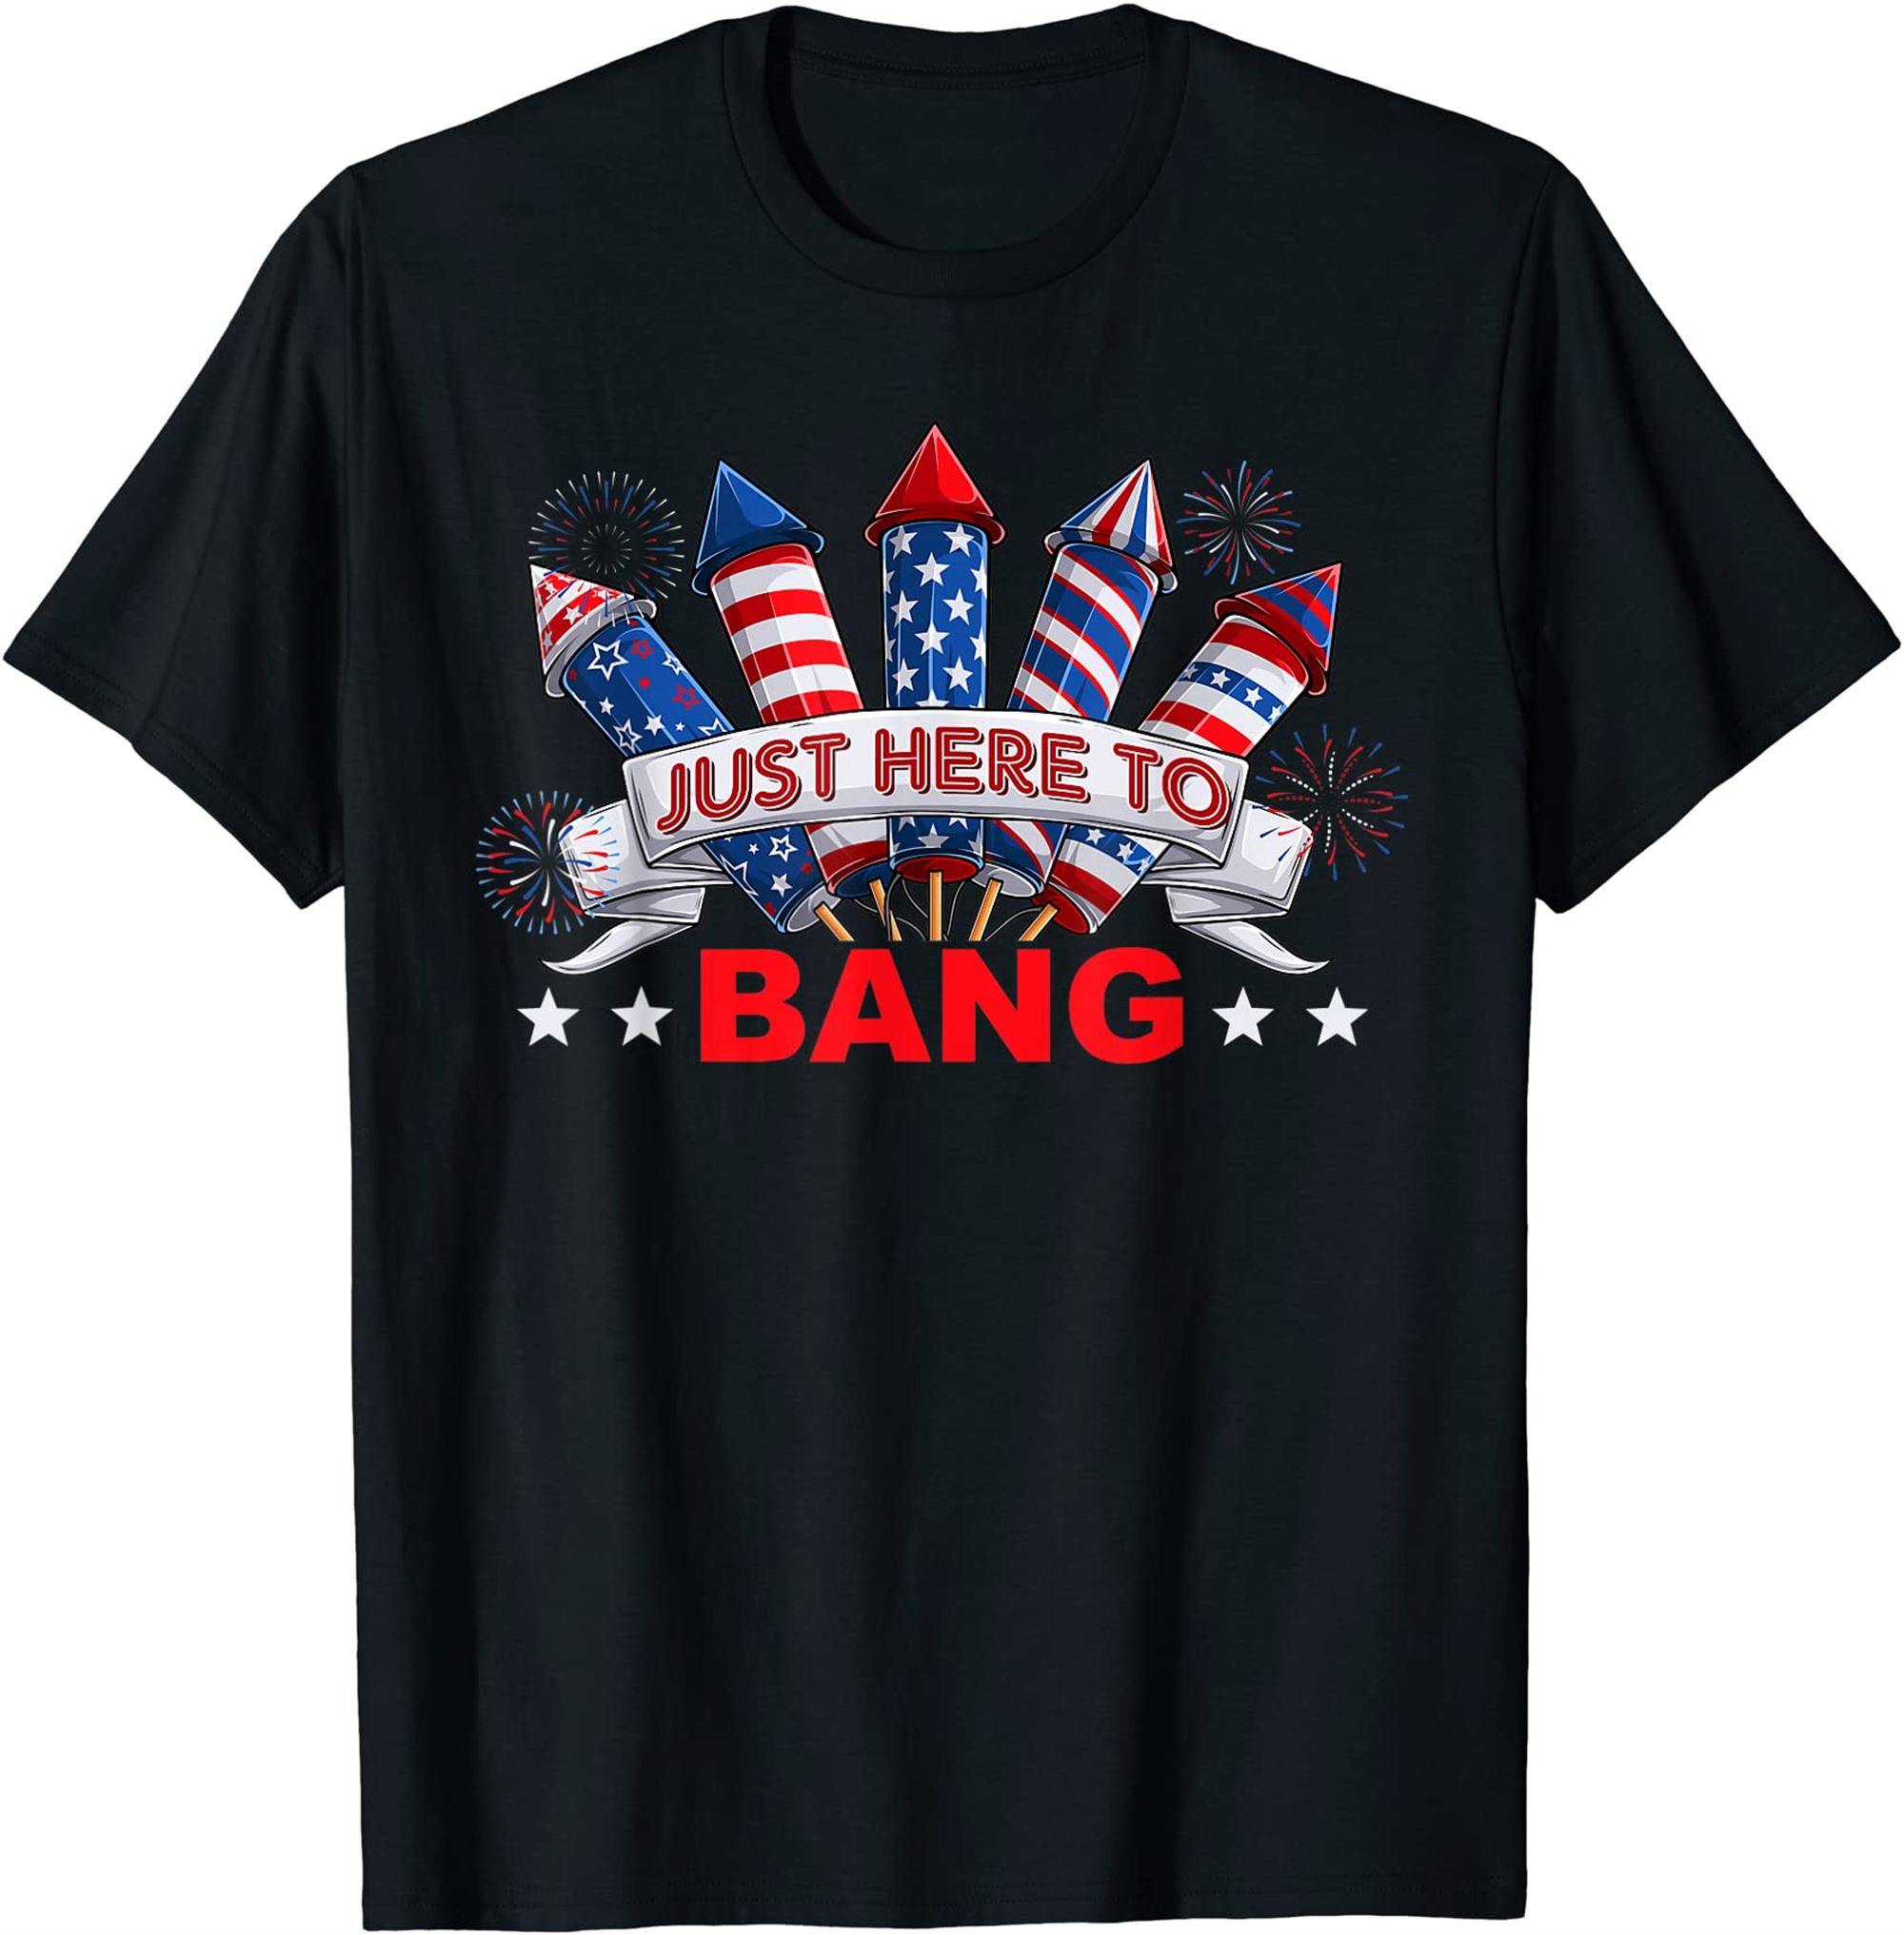 Funny Im Just Here To Bang Tee 4th Of July Mens Womens Kids T-shirt Size Up To 5xl